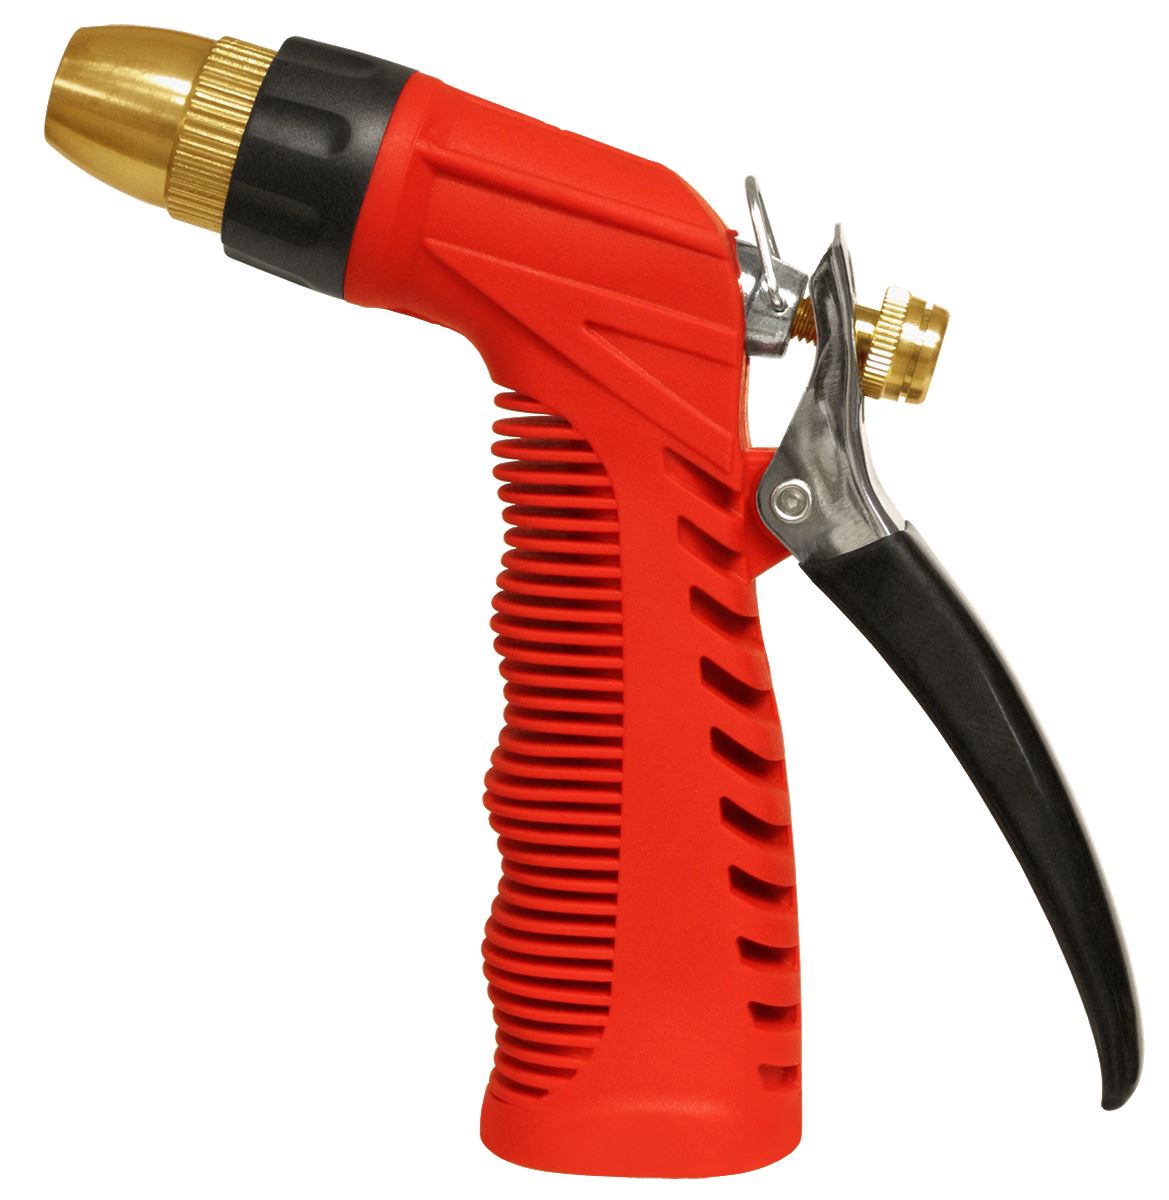 Tornador® Air Blow Gun. Professional Detailing Products, Because Your Car  is a Reflection of You